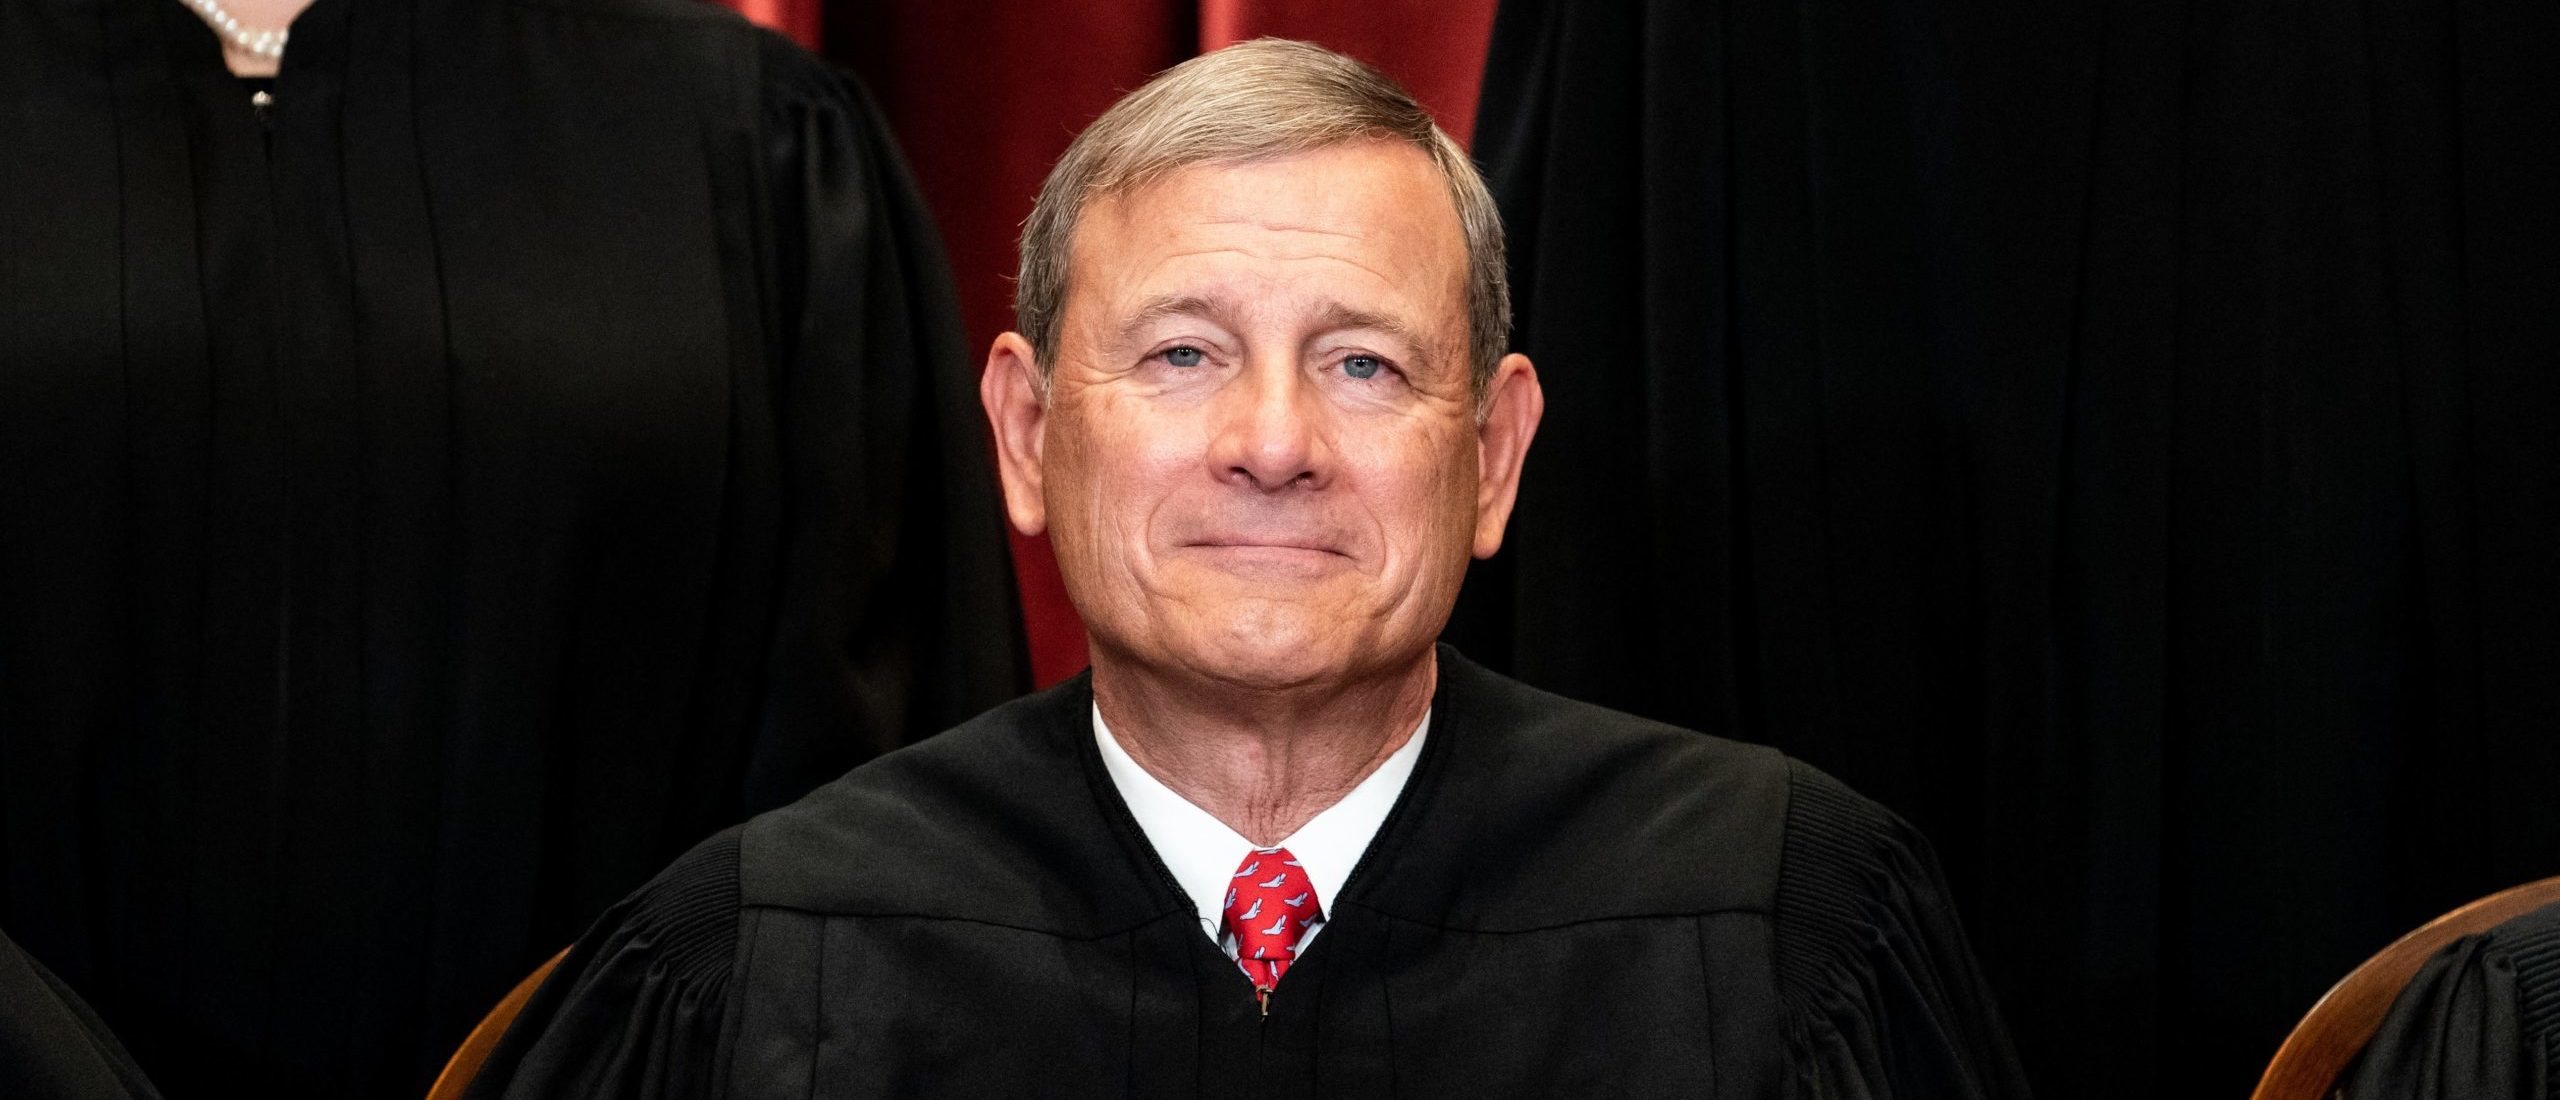 Chief Justice John Roberts sits during a group photo of the Justices at the Supreme Court in Washington, DC on April 23, 2021. (Photo by Erin Schaff / POOL / AFP) (Photo by ERIN SCHAFF/POOL/AFP via Getty Images)